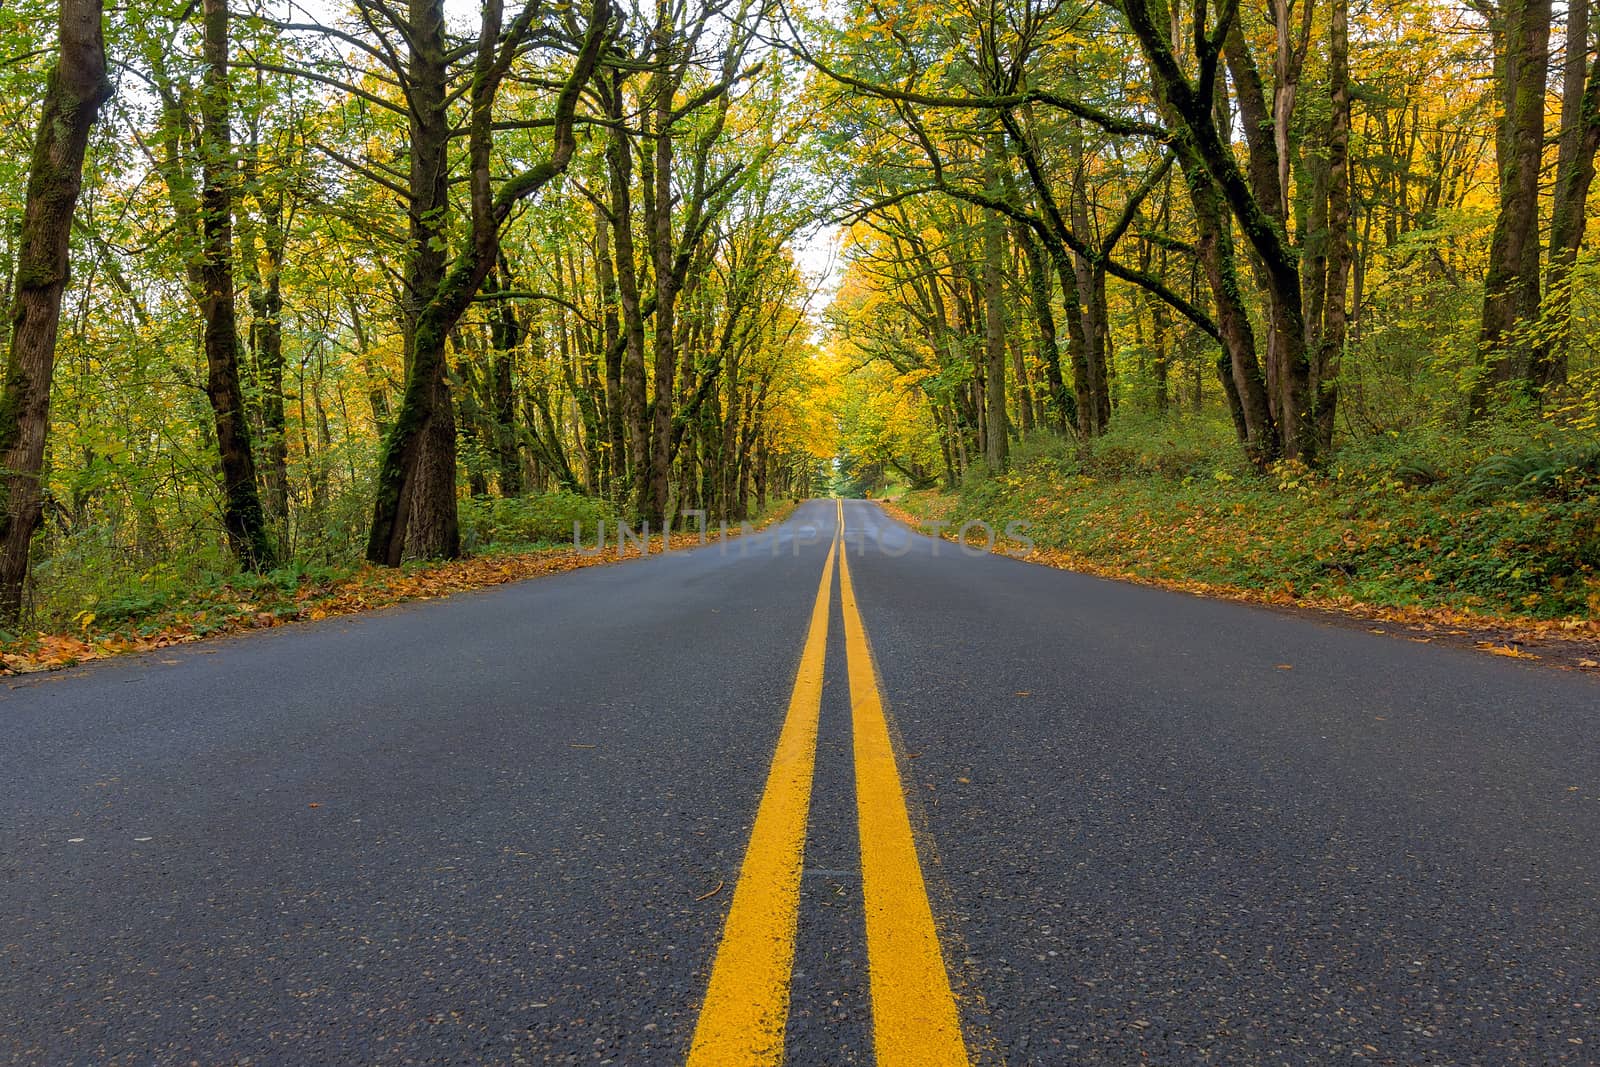 Historic Columbia River Highway Two Way Lanes in Fall by jpldesigns